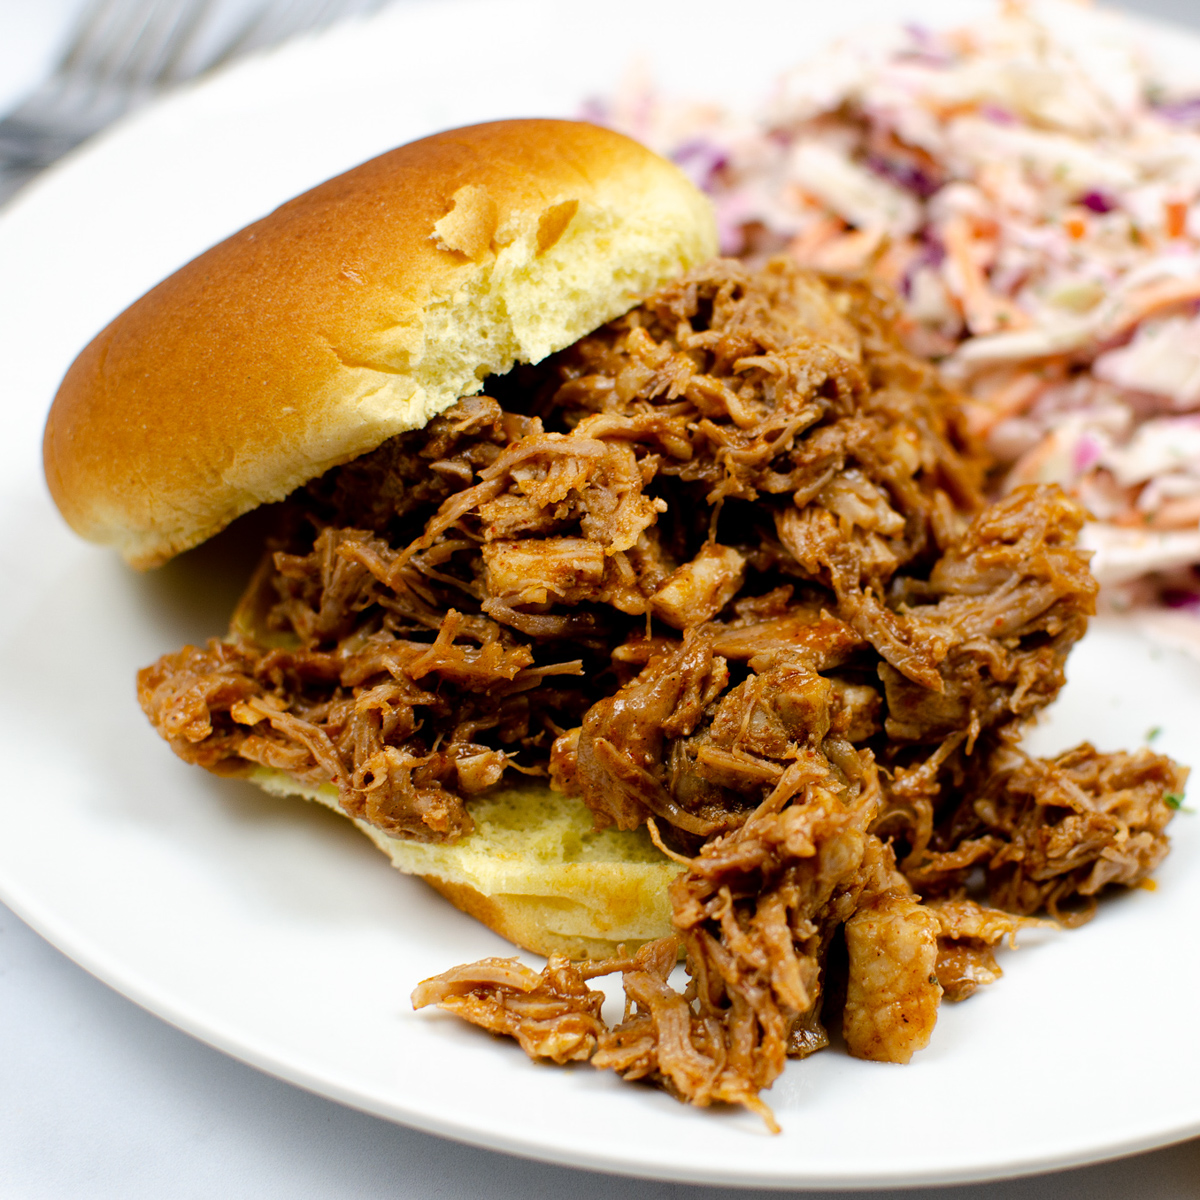 BBQ pulled pork sandwich with coleslaw in the background